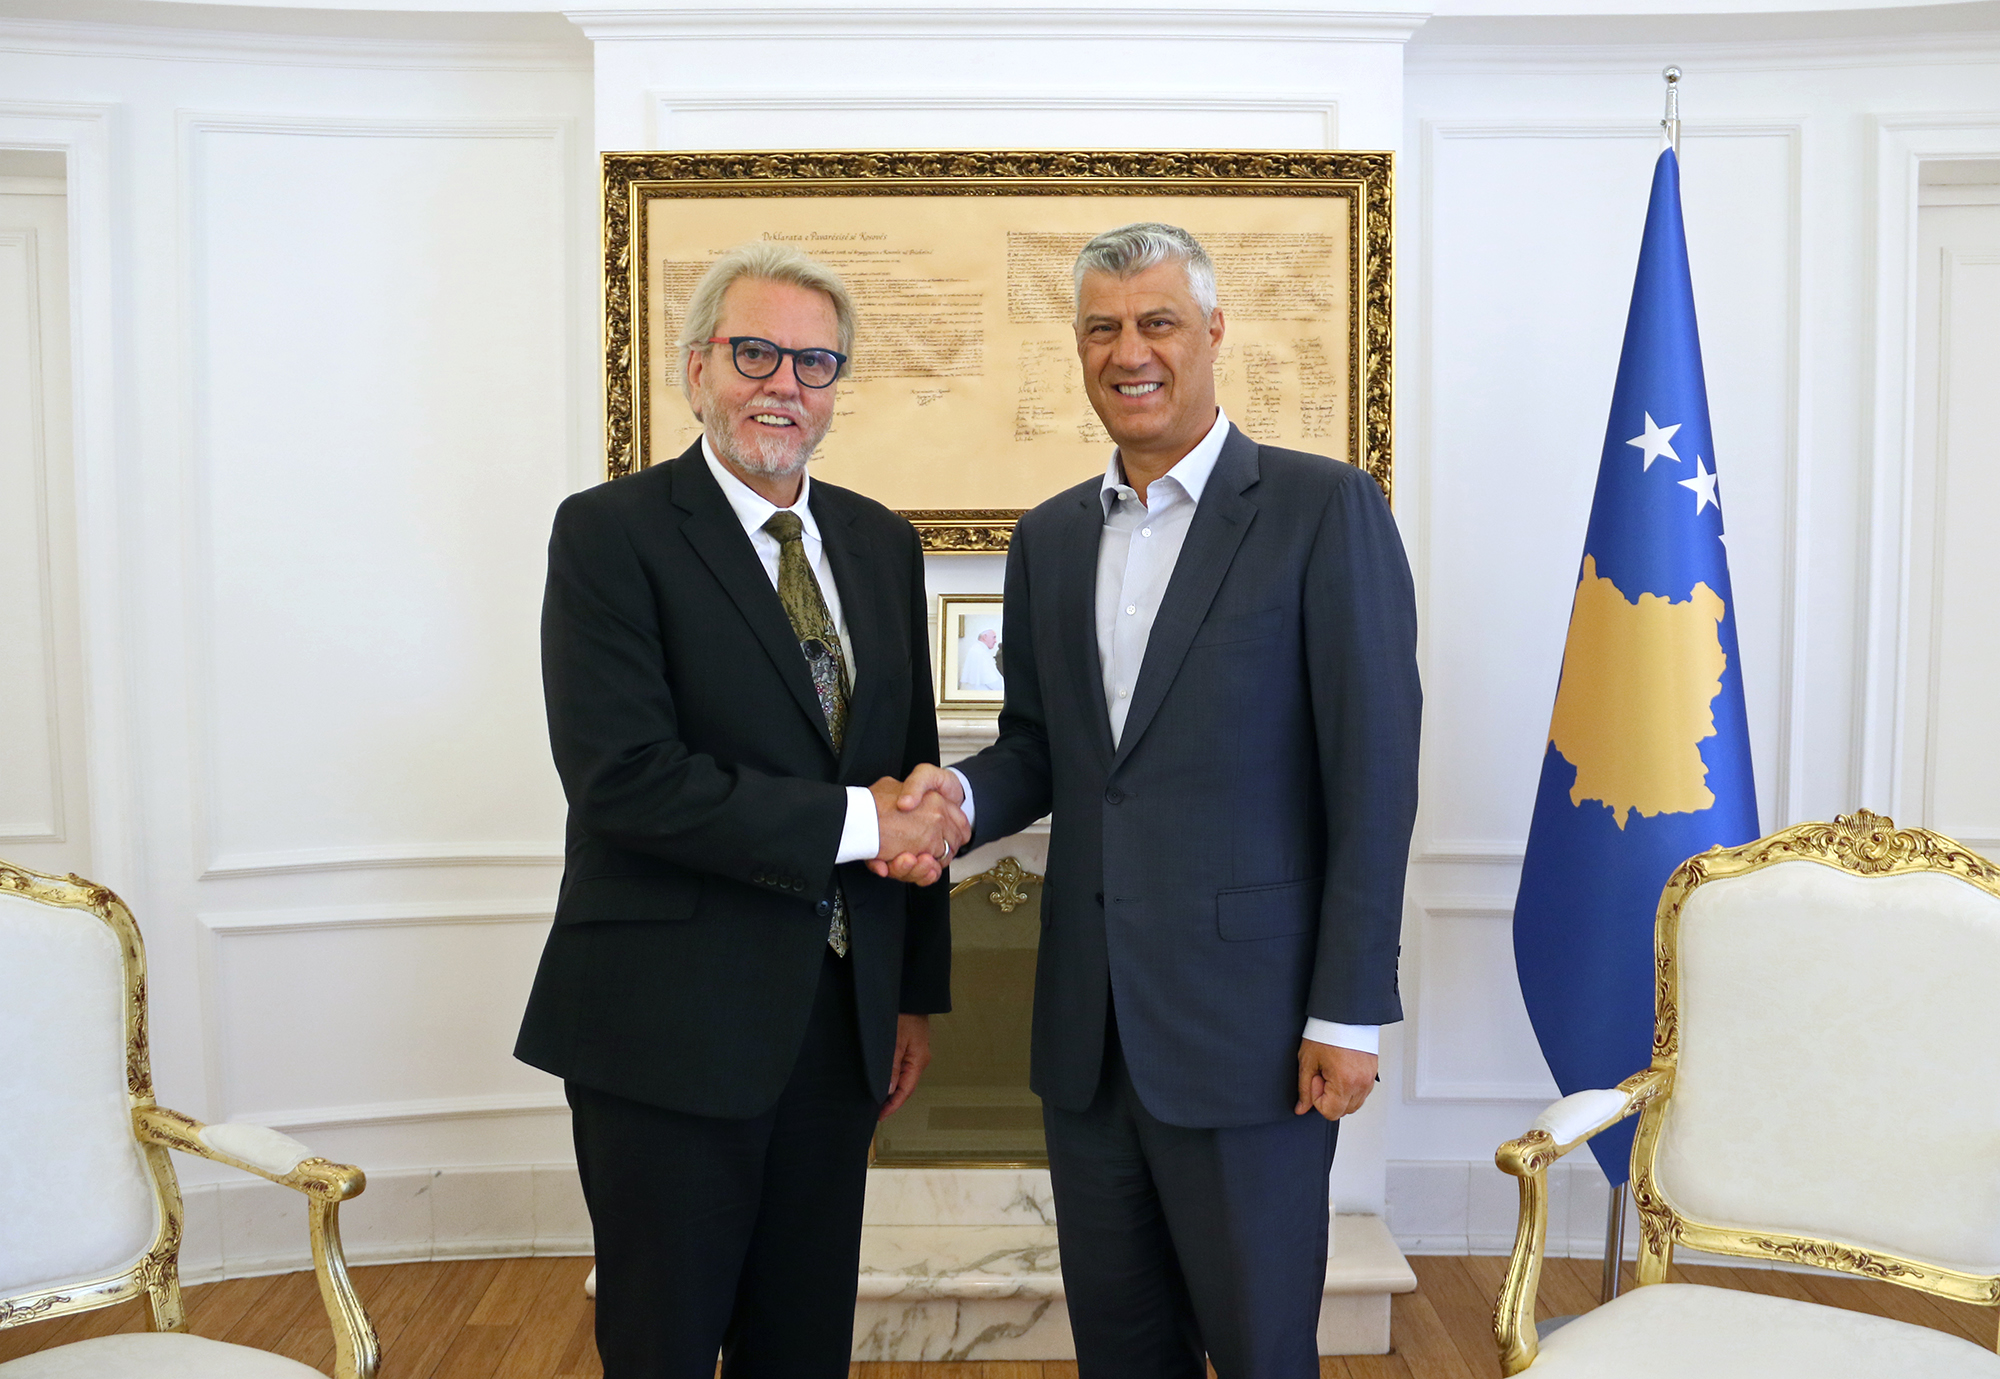 Acting Head of Mission, Bernd Thran holds introductory meeting with President of Kosovo, Hashim Thaçi